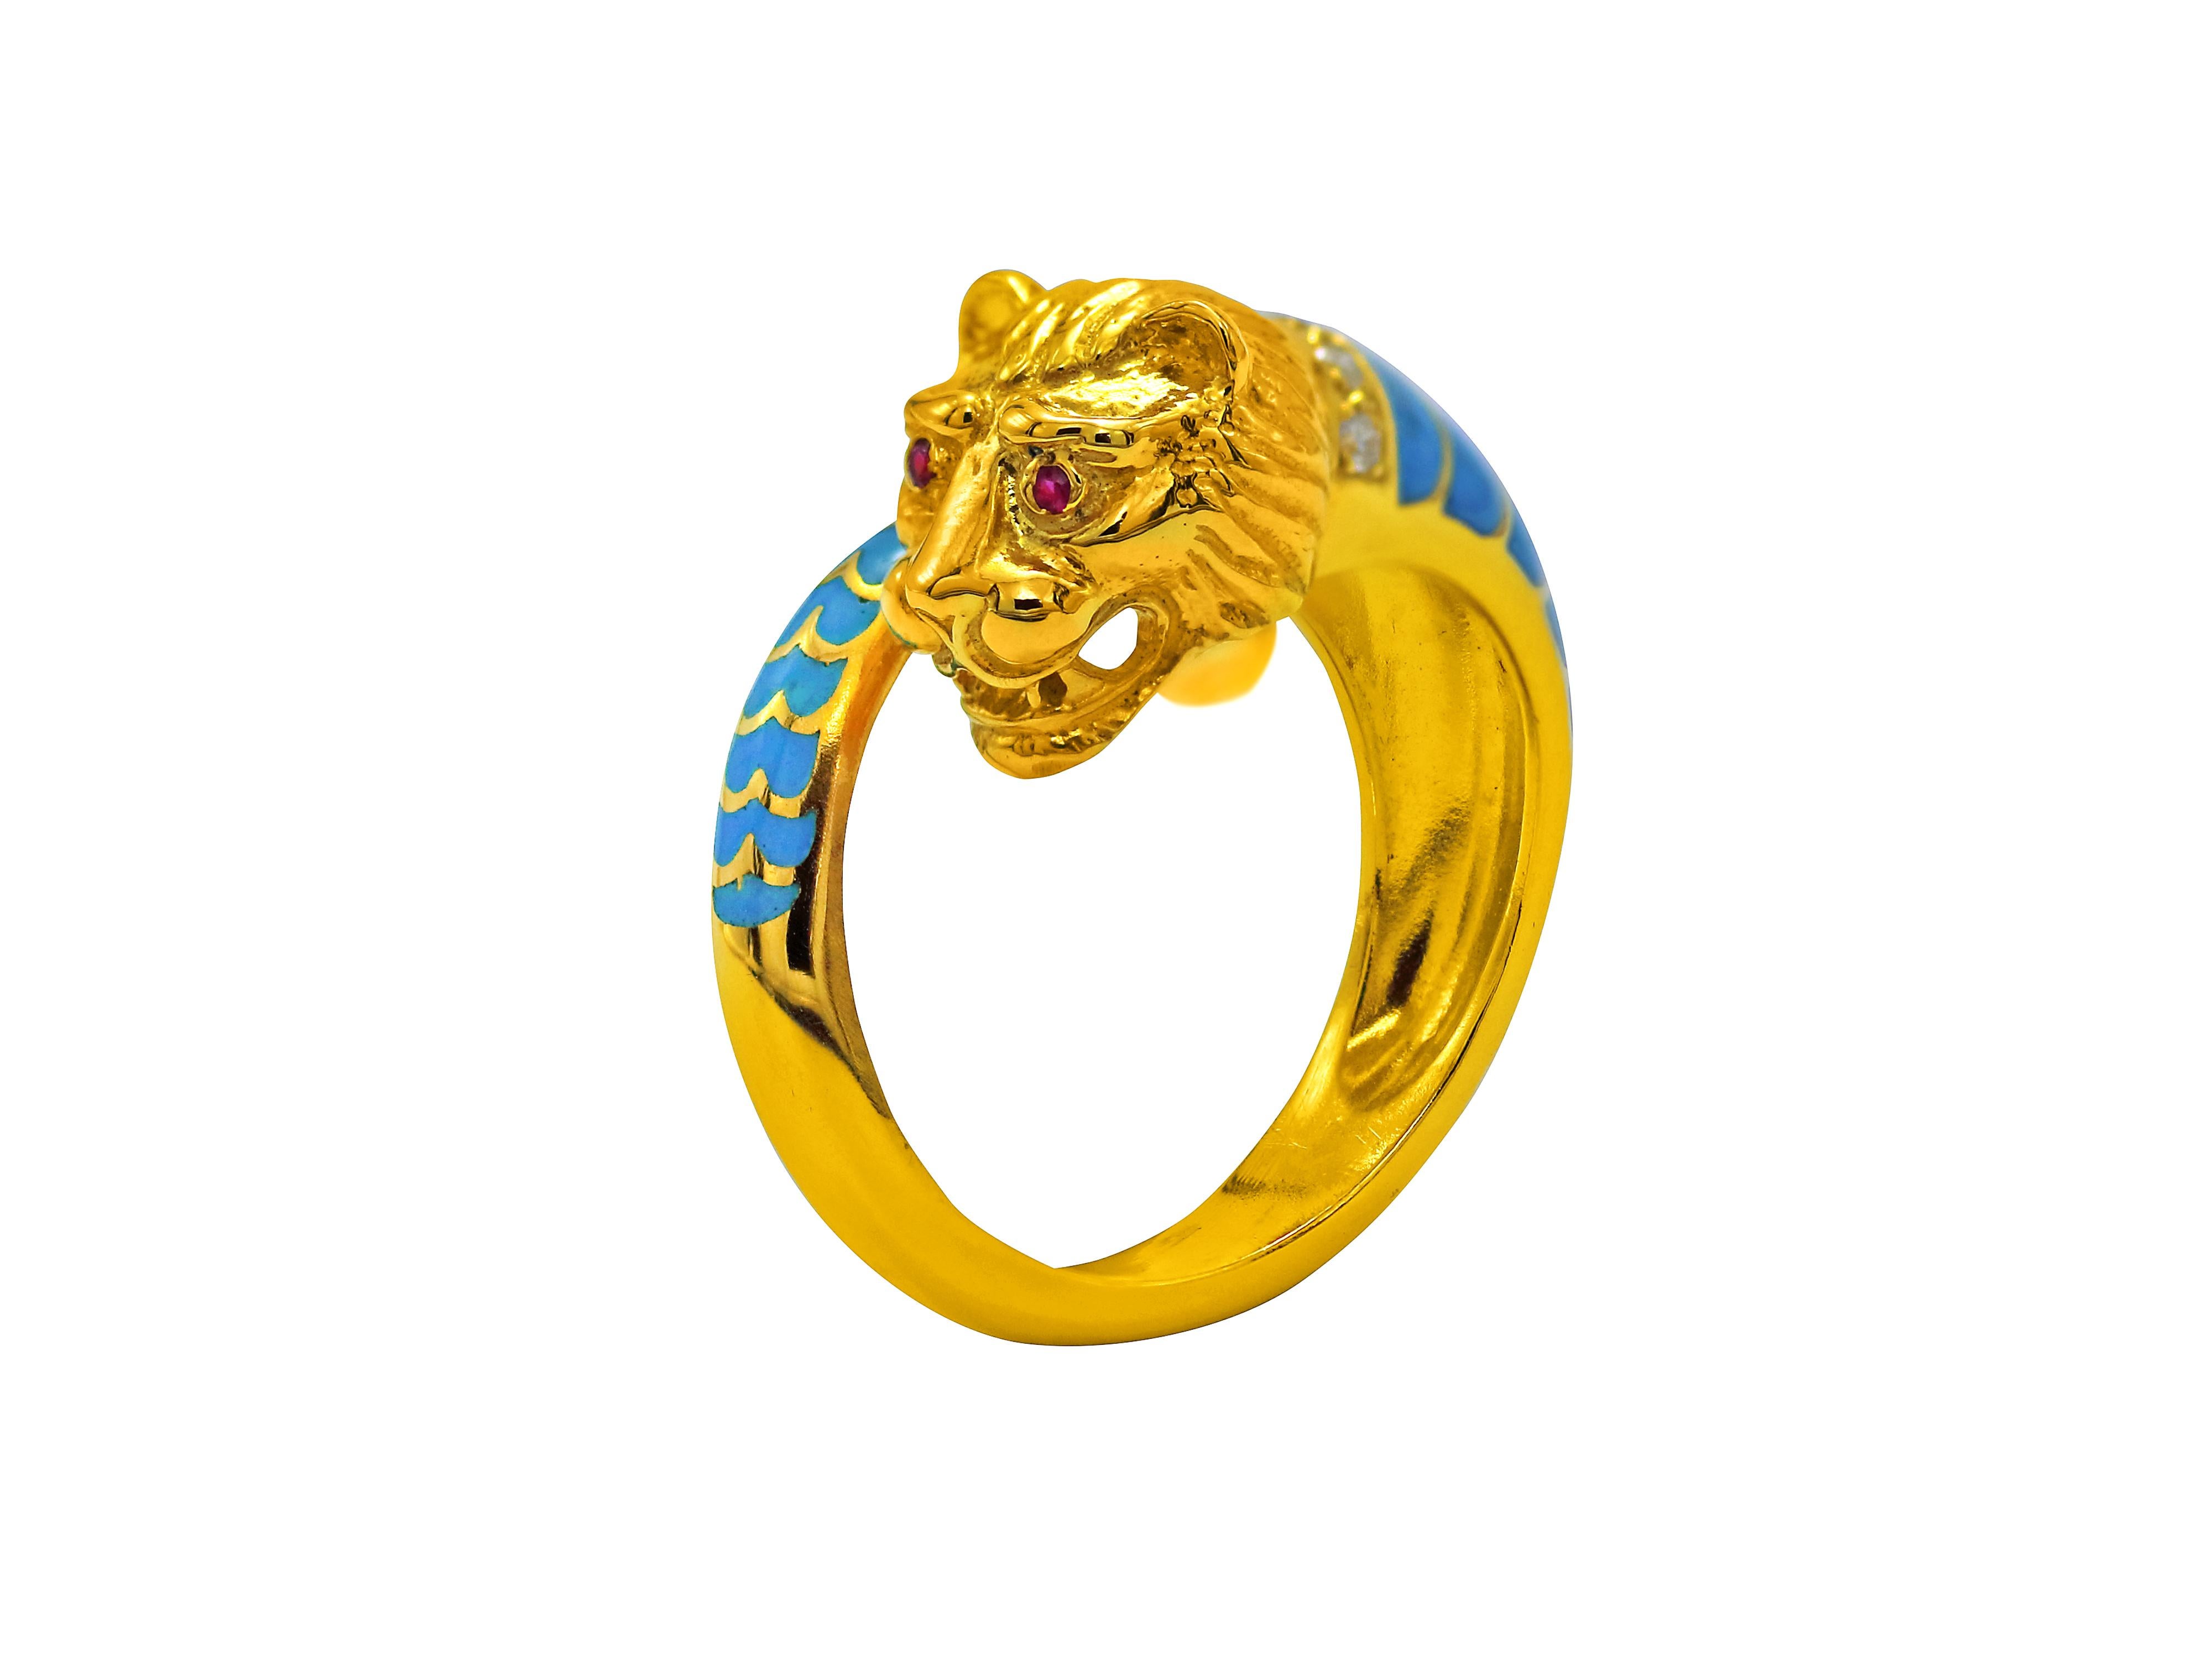 Greek Revival Dimos 18k Gold Lion Ring with Rubies and Diamonds